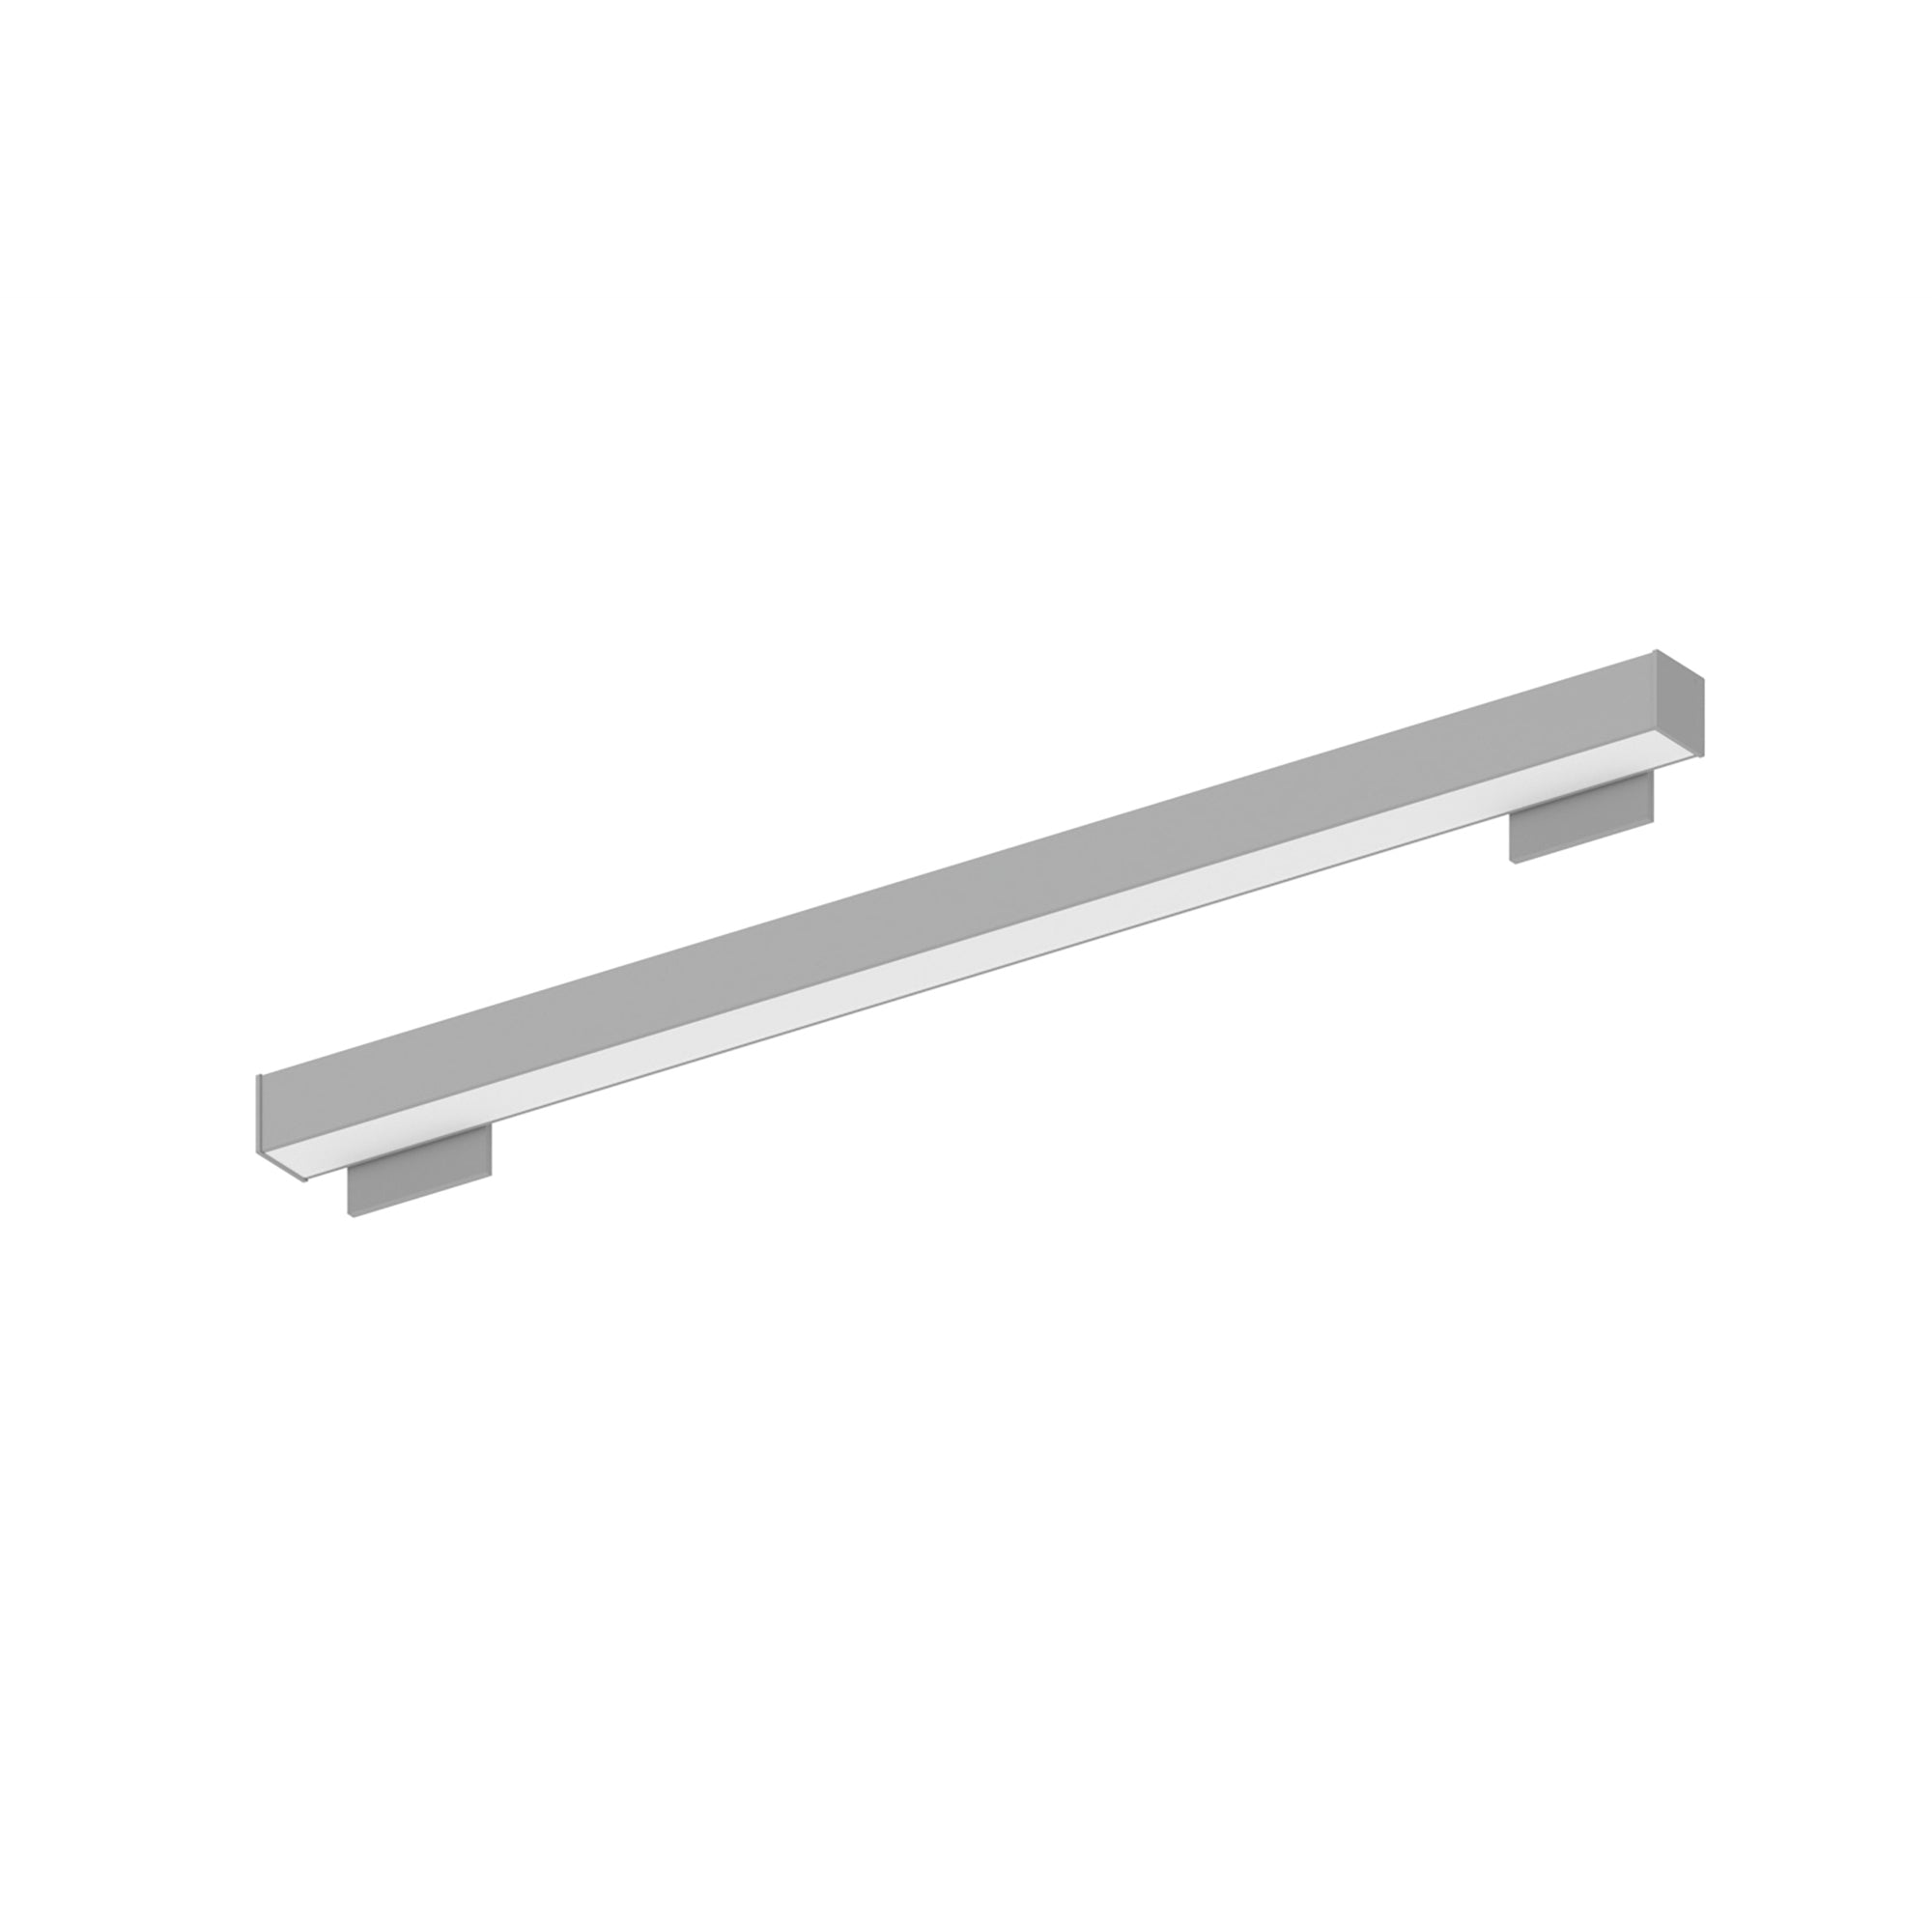 Nora Lighting NWLIN-41030A/L4-R4 - Linear - 4' L-Line LED Wall Mount Linear, 4200lm / 3000K, 4 Inchx4 Inch Left Plate & 4 Inchx4 Inch Right Plate, Aluminum Finish